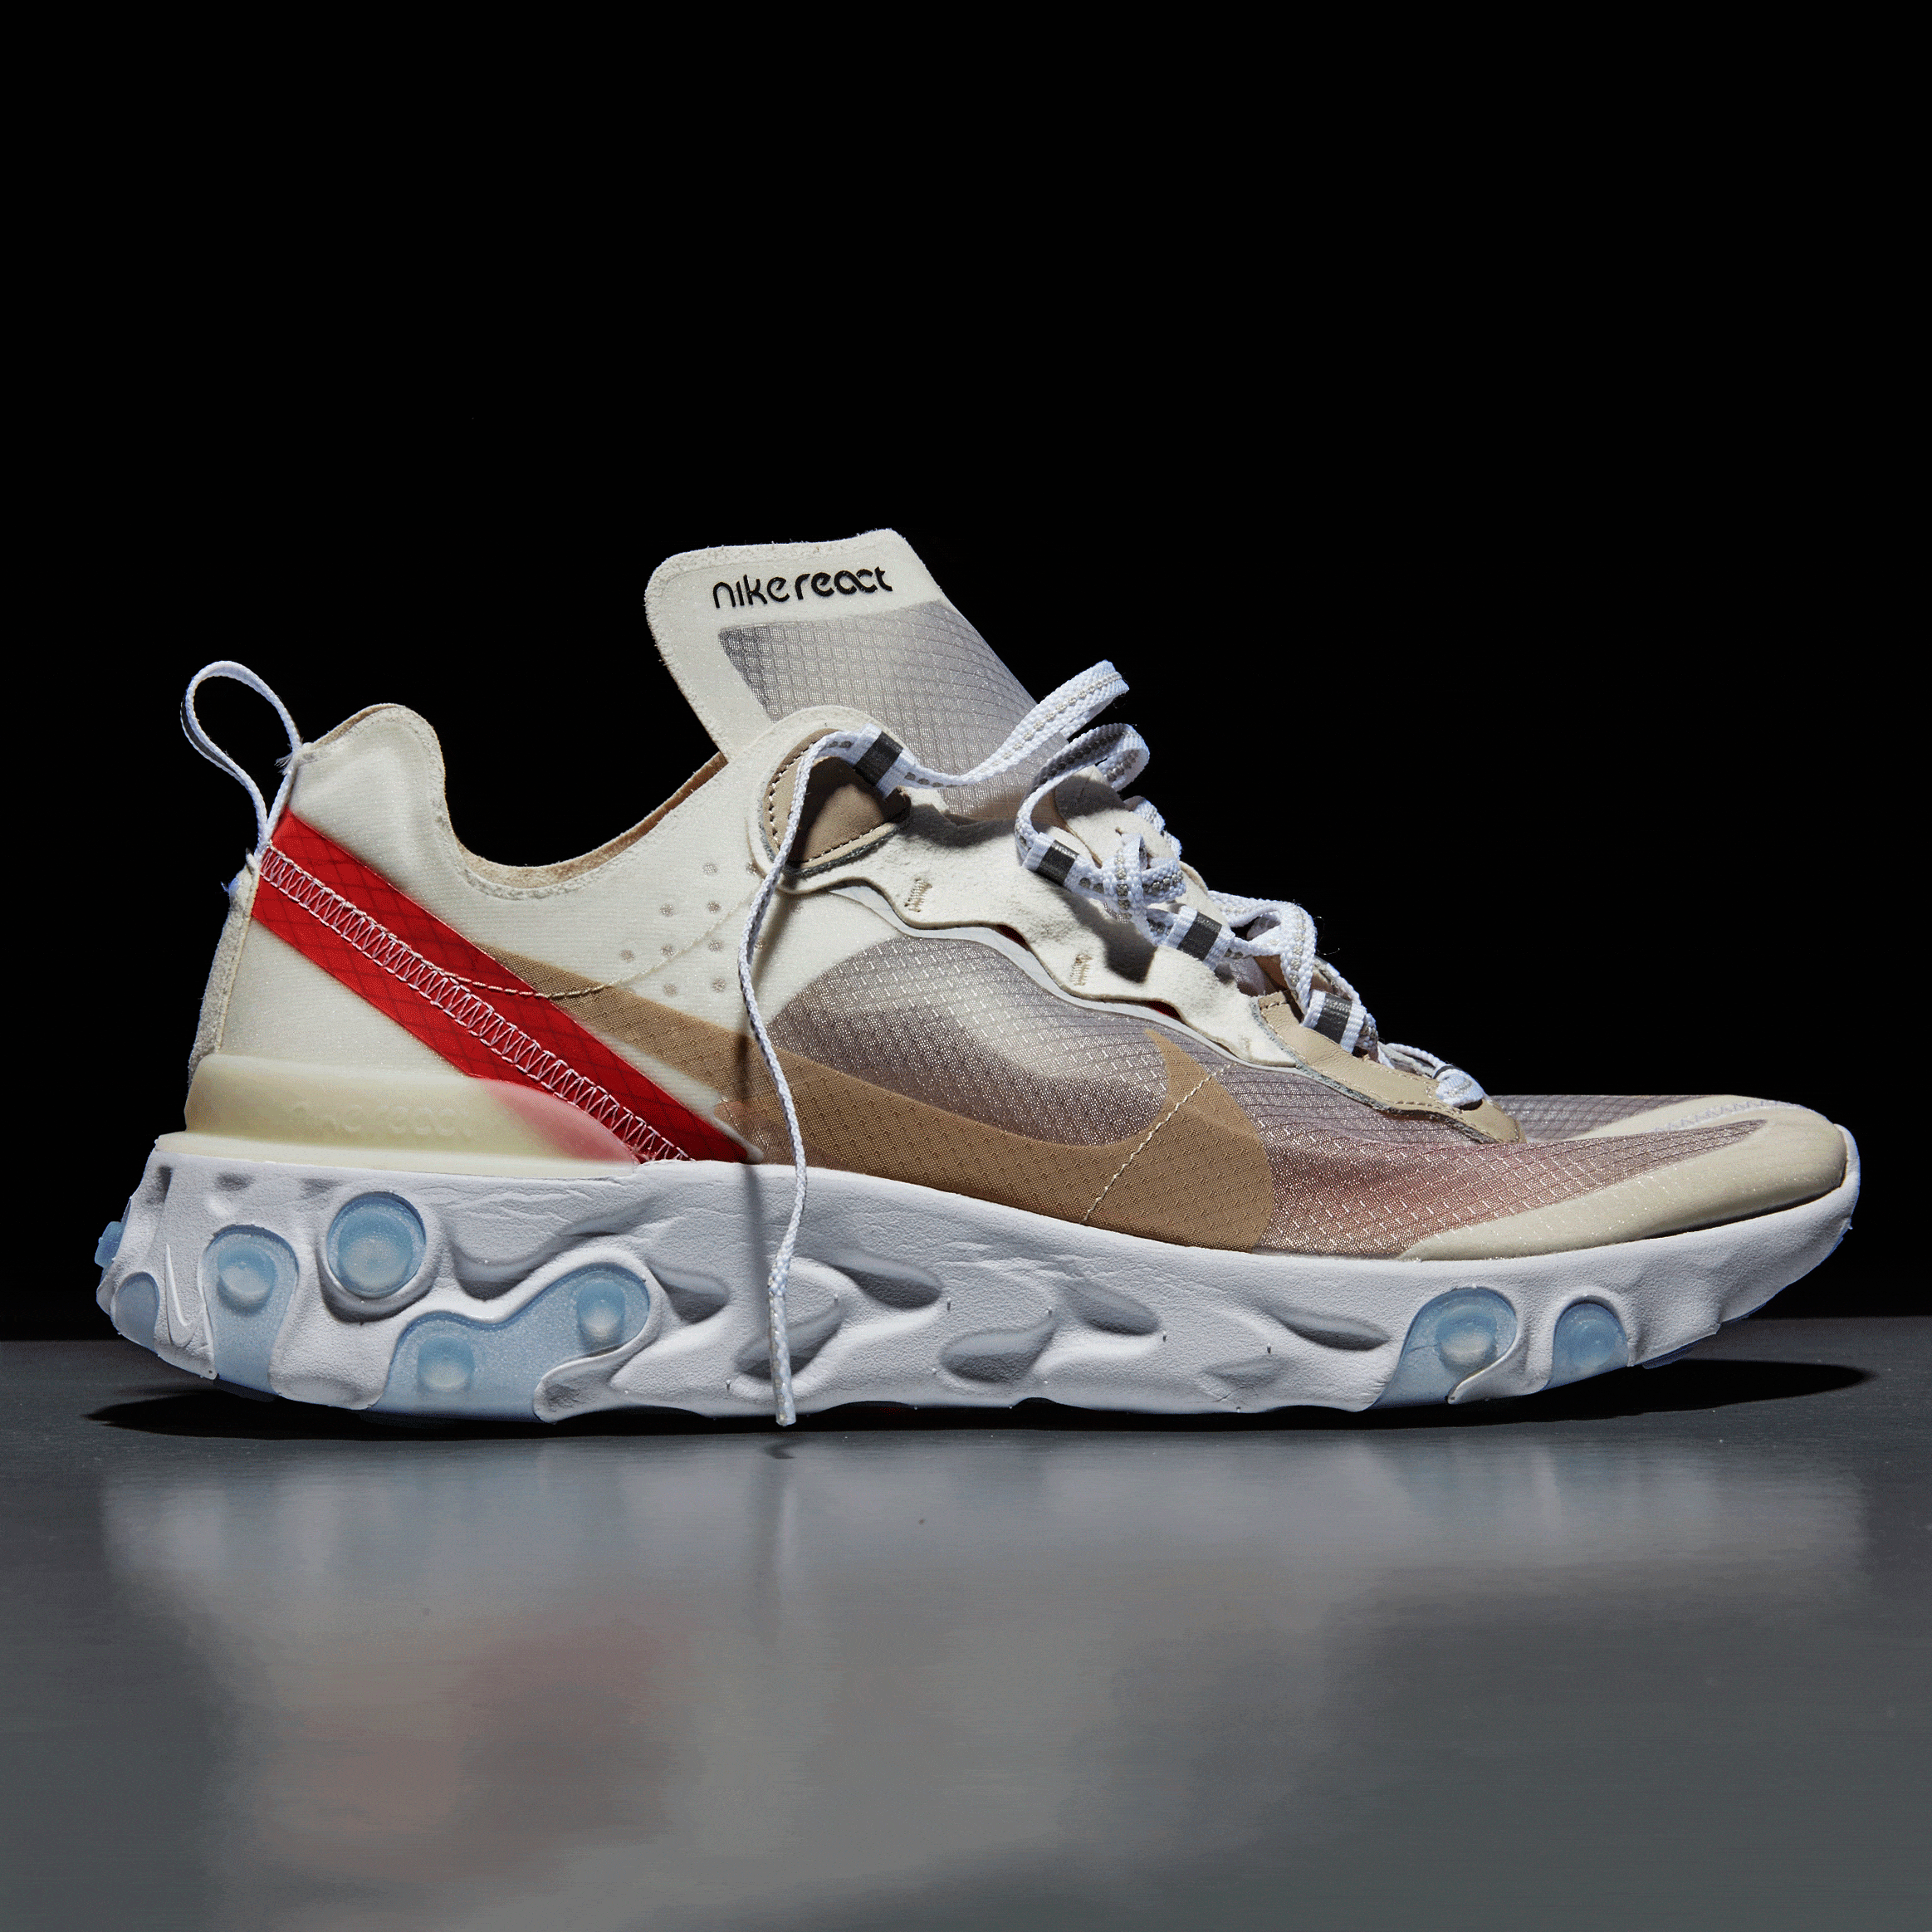 Nautical hedge ecstasy Nike React Element 87 Review - Nike Running Shoes